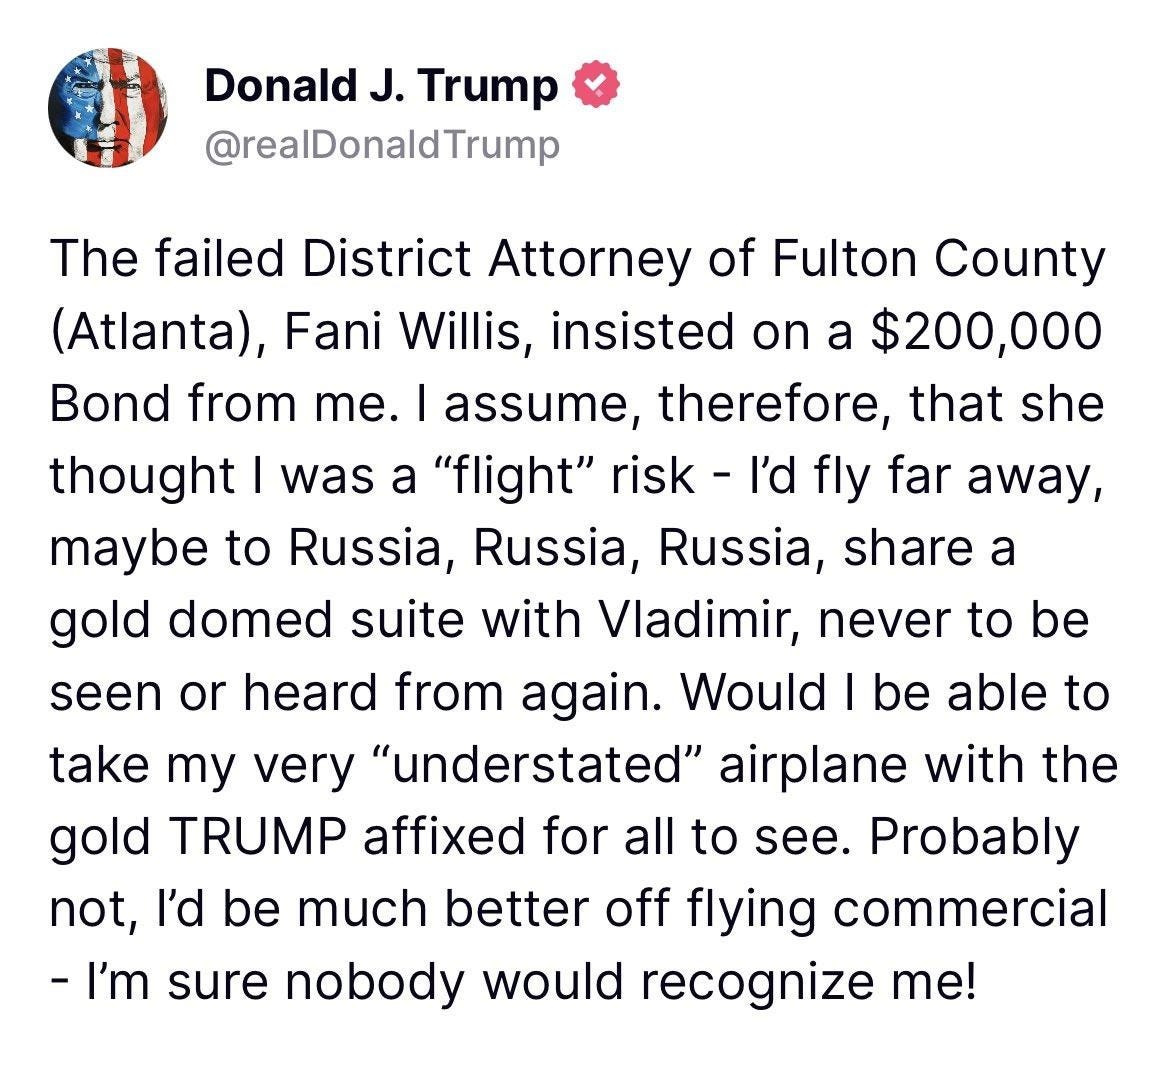 A Trump post reading: "The failed District Attorney of Fulton County (Atlanta), Fani Willis, insisted on a $200,000 Bond from me. I assume, therefore, that she thought I was a "flight" risk - I'd fly far away, maybe to Russia, Russia, Russia, share a gold domed suite with Vladimir, never to be seen or heard from again. Would I be able to take my very "understated" airplane with the gold TRUMP affixed for all to see. Probably not, I'd be much better off flying commercial -- I'm sure nobody would recognize me!